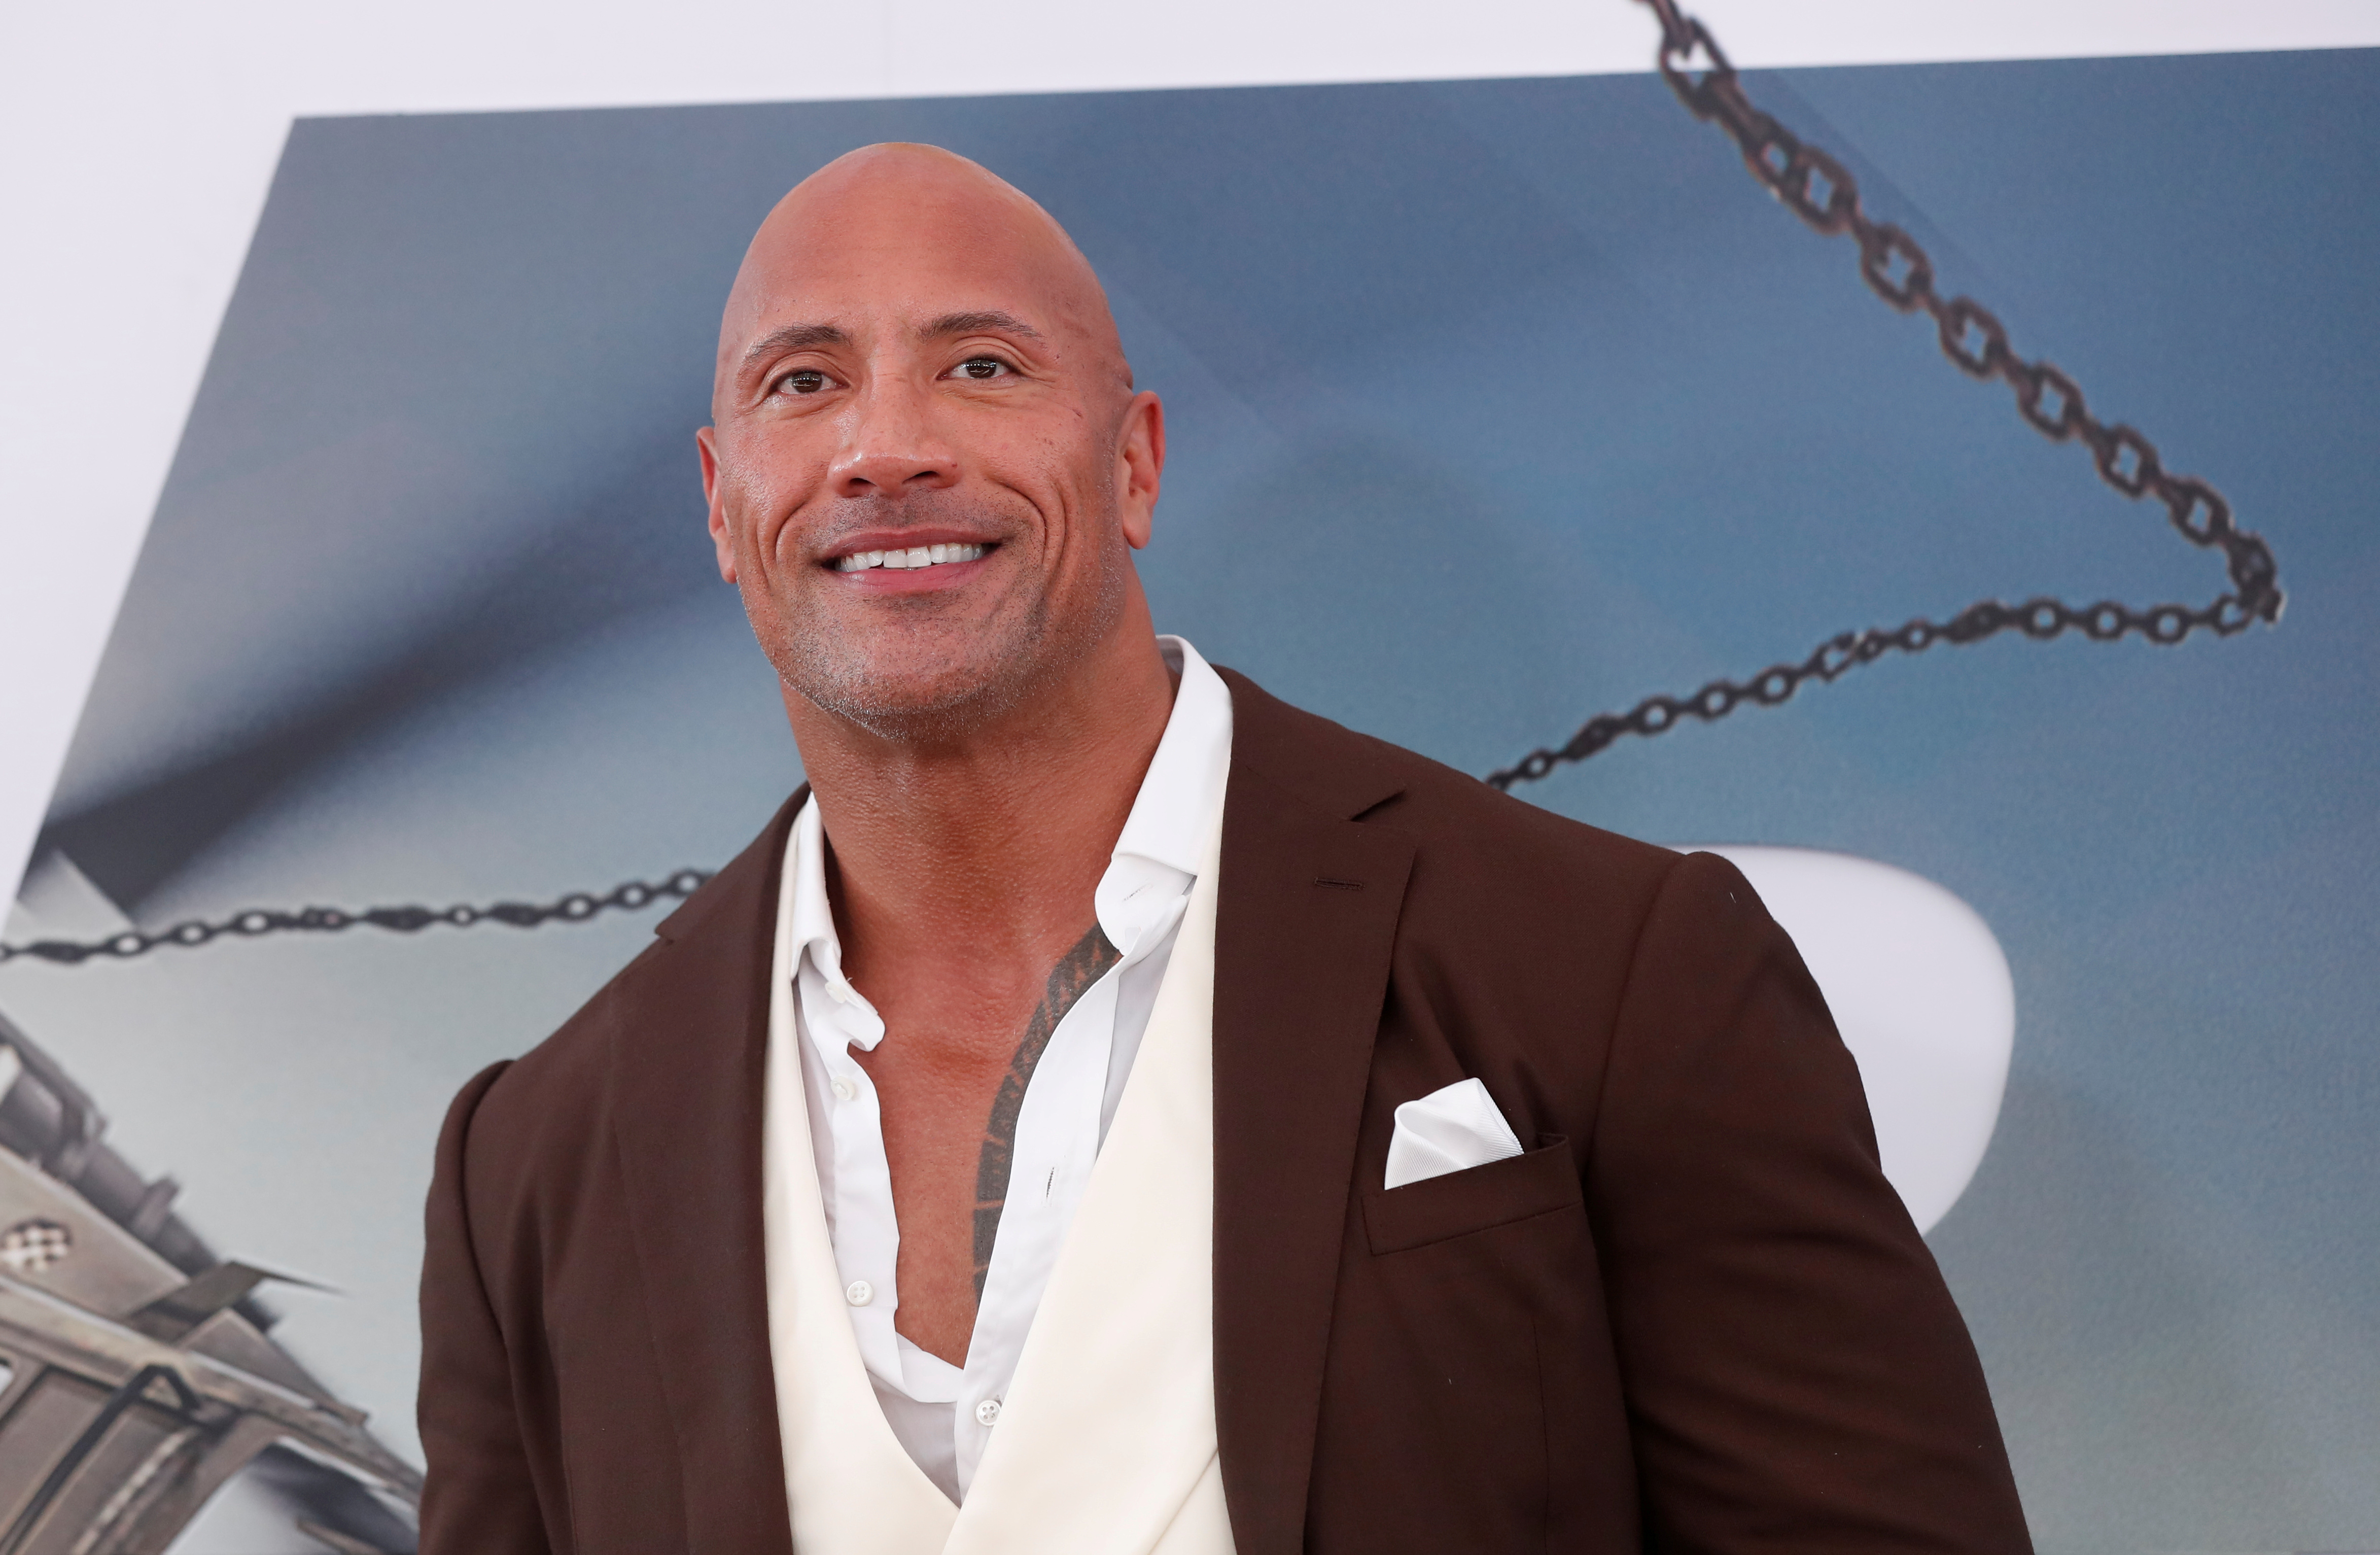 Premiere for "Fast & Furious Presents: Hobbs & Shaw" in Los Angeles, California